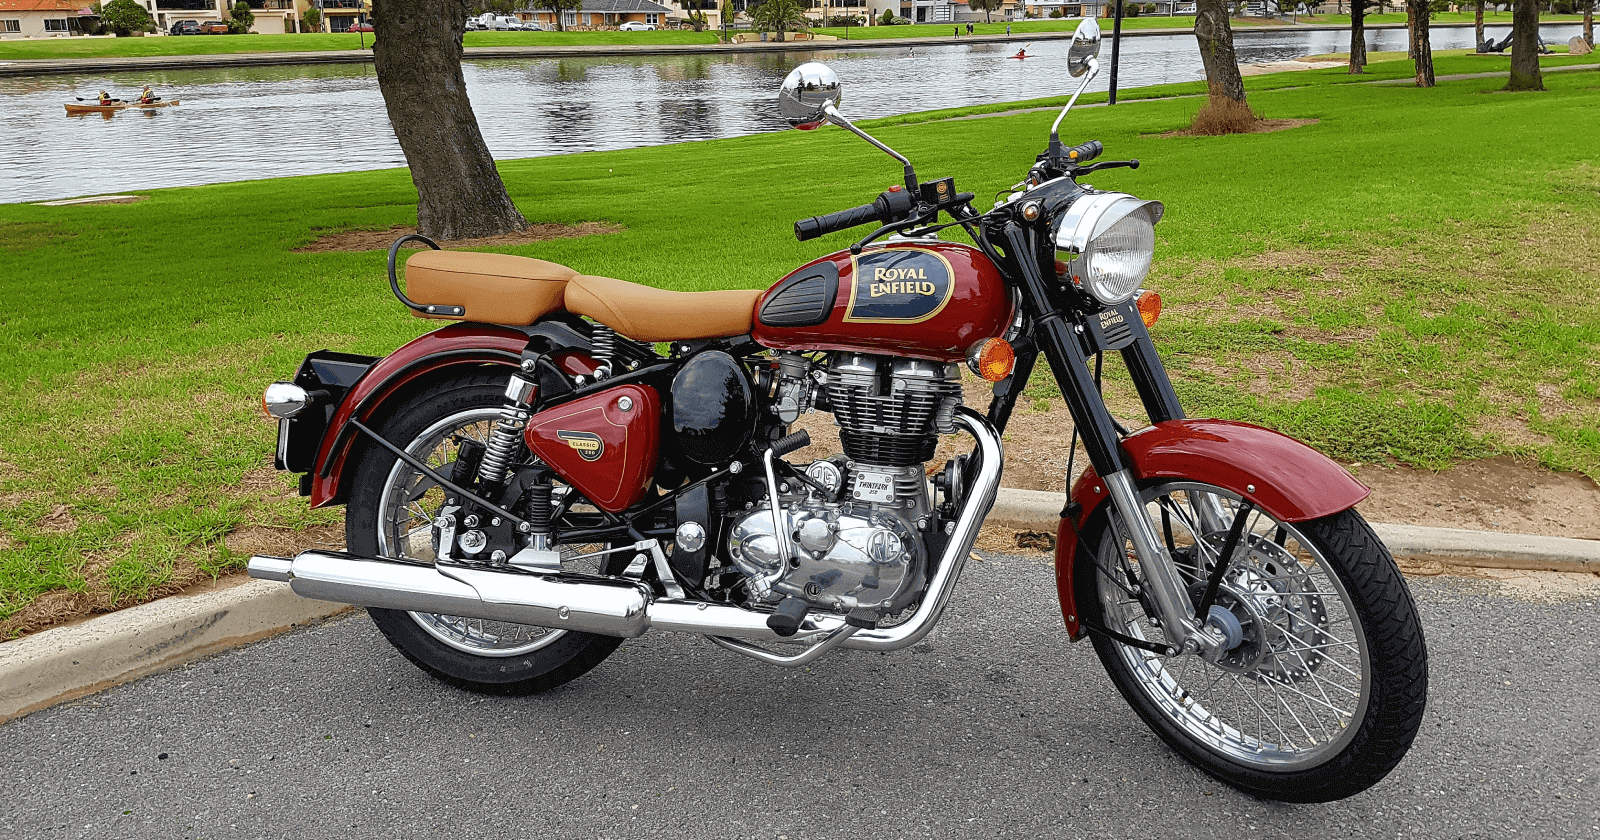 Best Royal Enfield Bikes in India